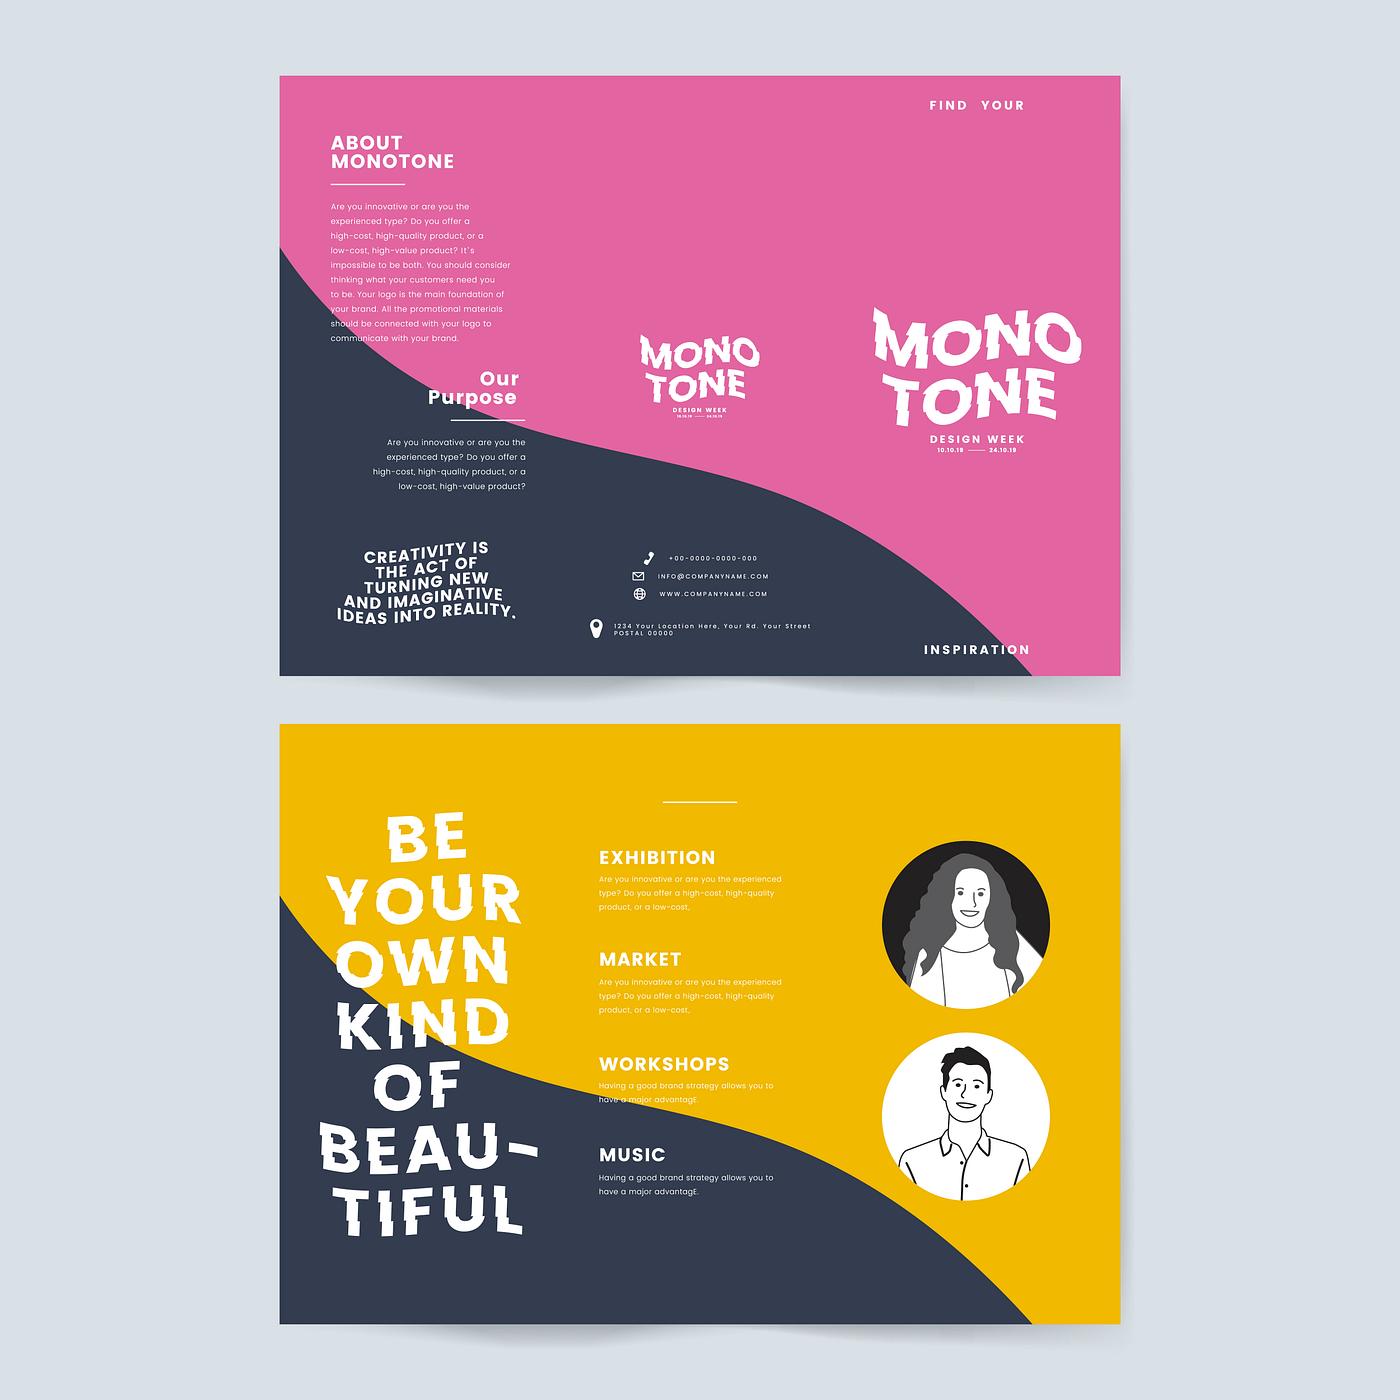 Download Print Collateral Mockup